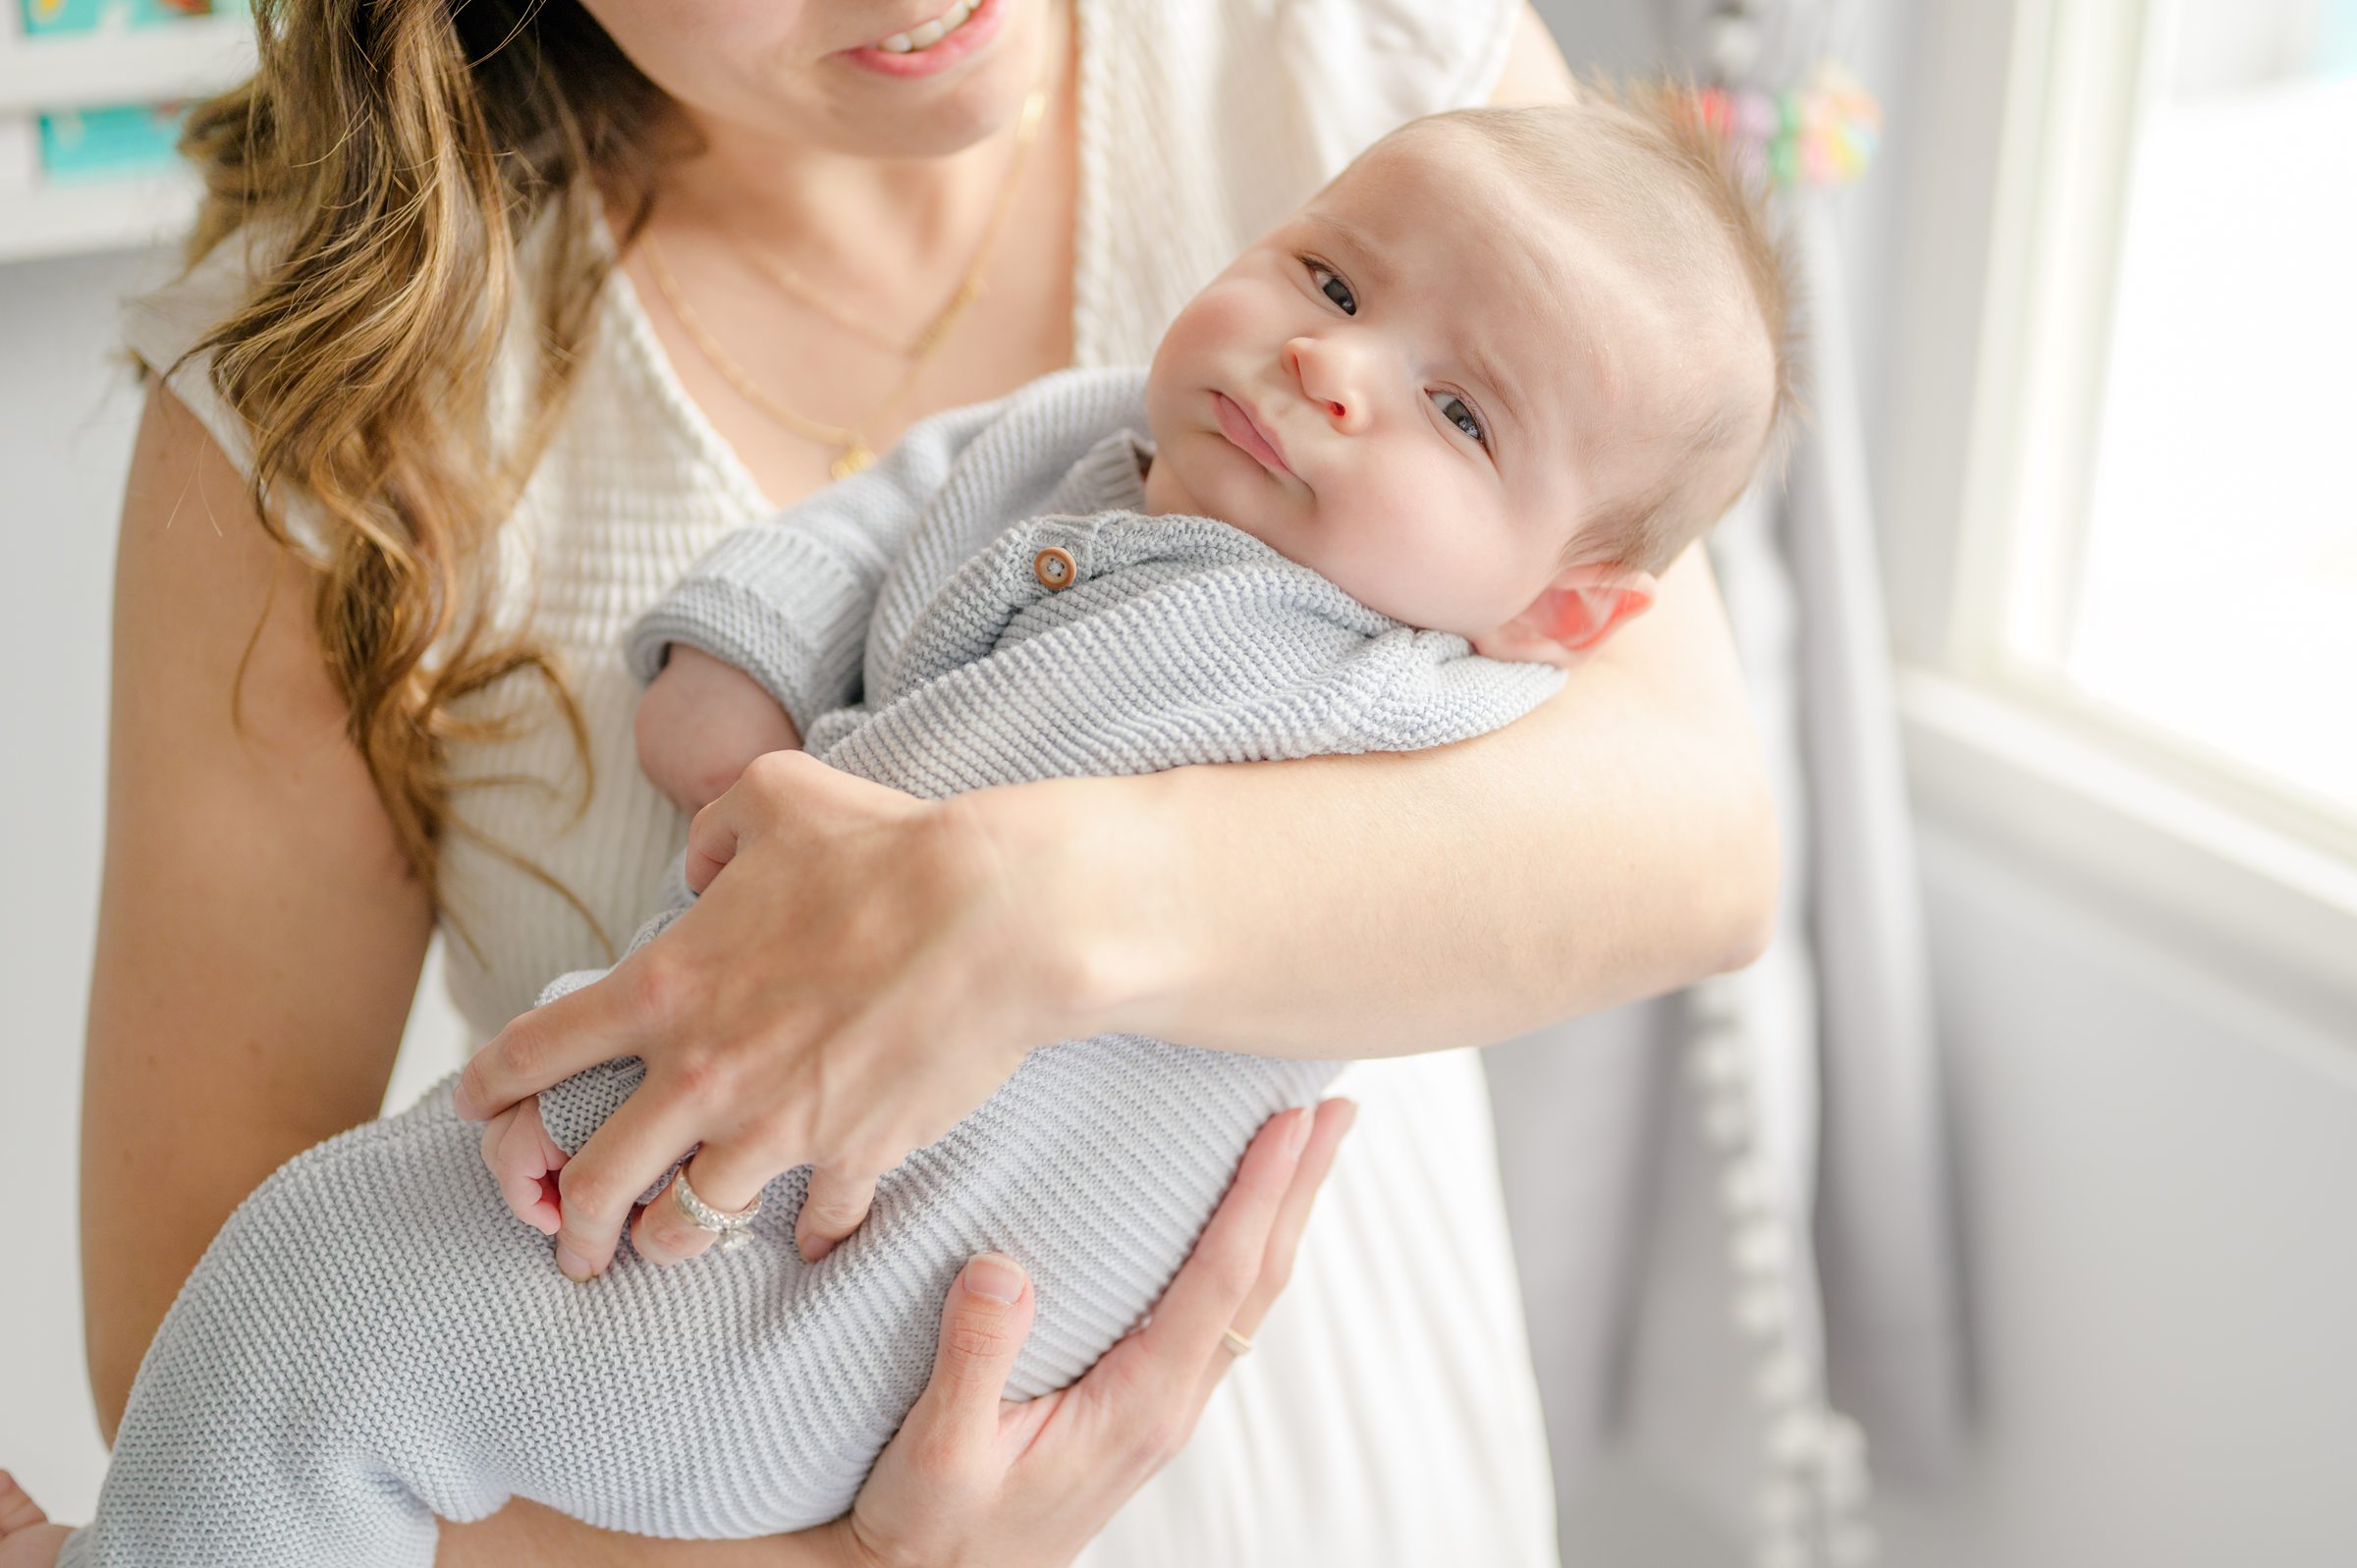 In-home newborn session in Baltimore, Maryland photographed by lifestyle family photographer Cait Kramer.